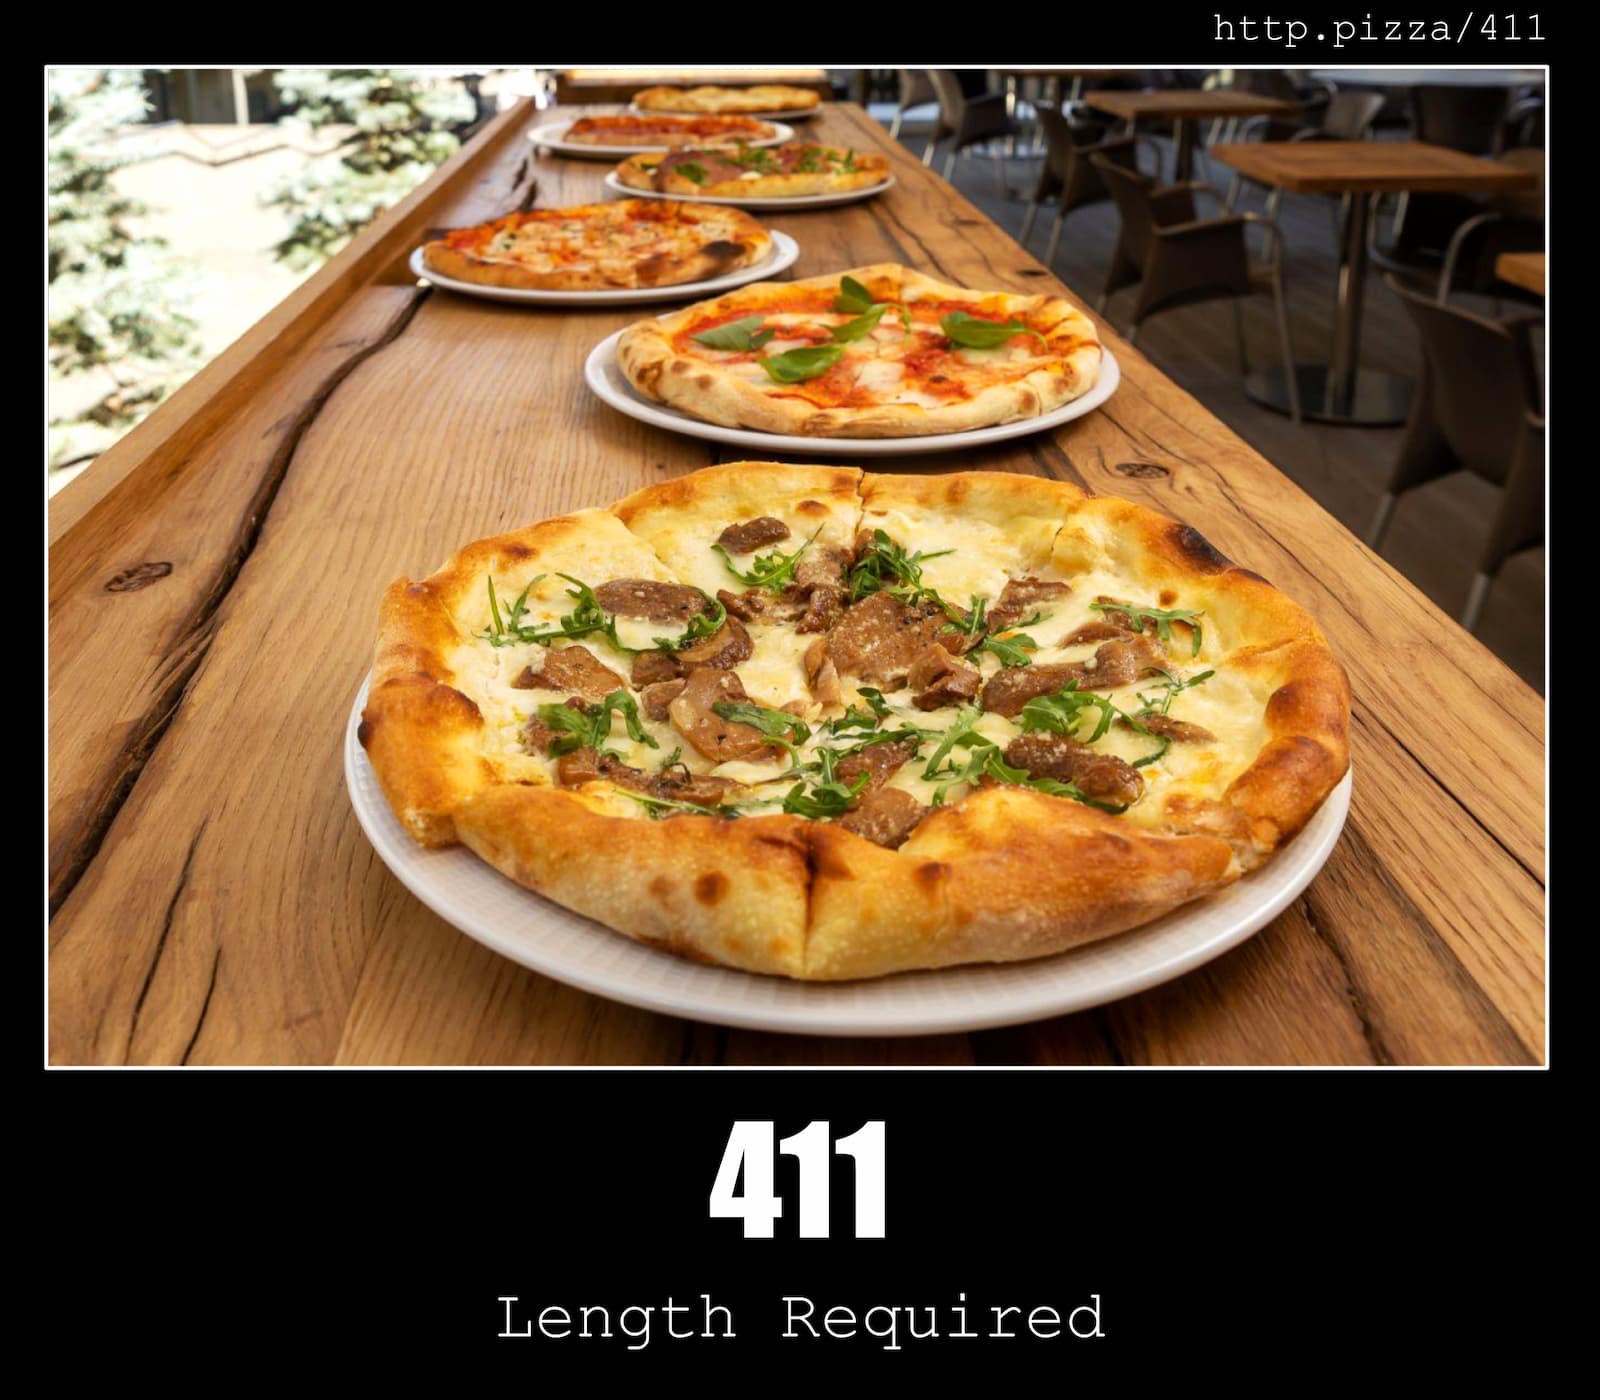 HTTP Status Code 411 Length Required & Pizzas